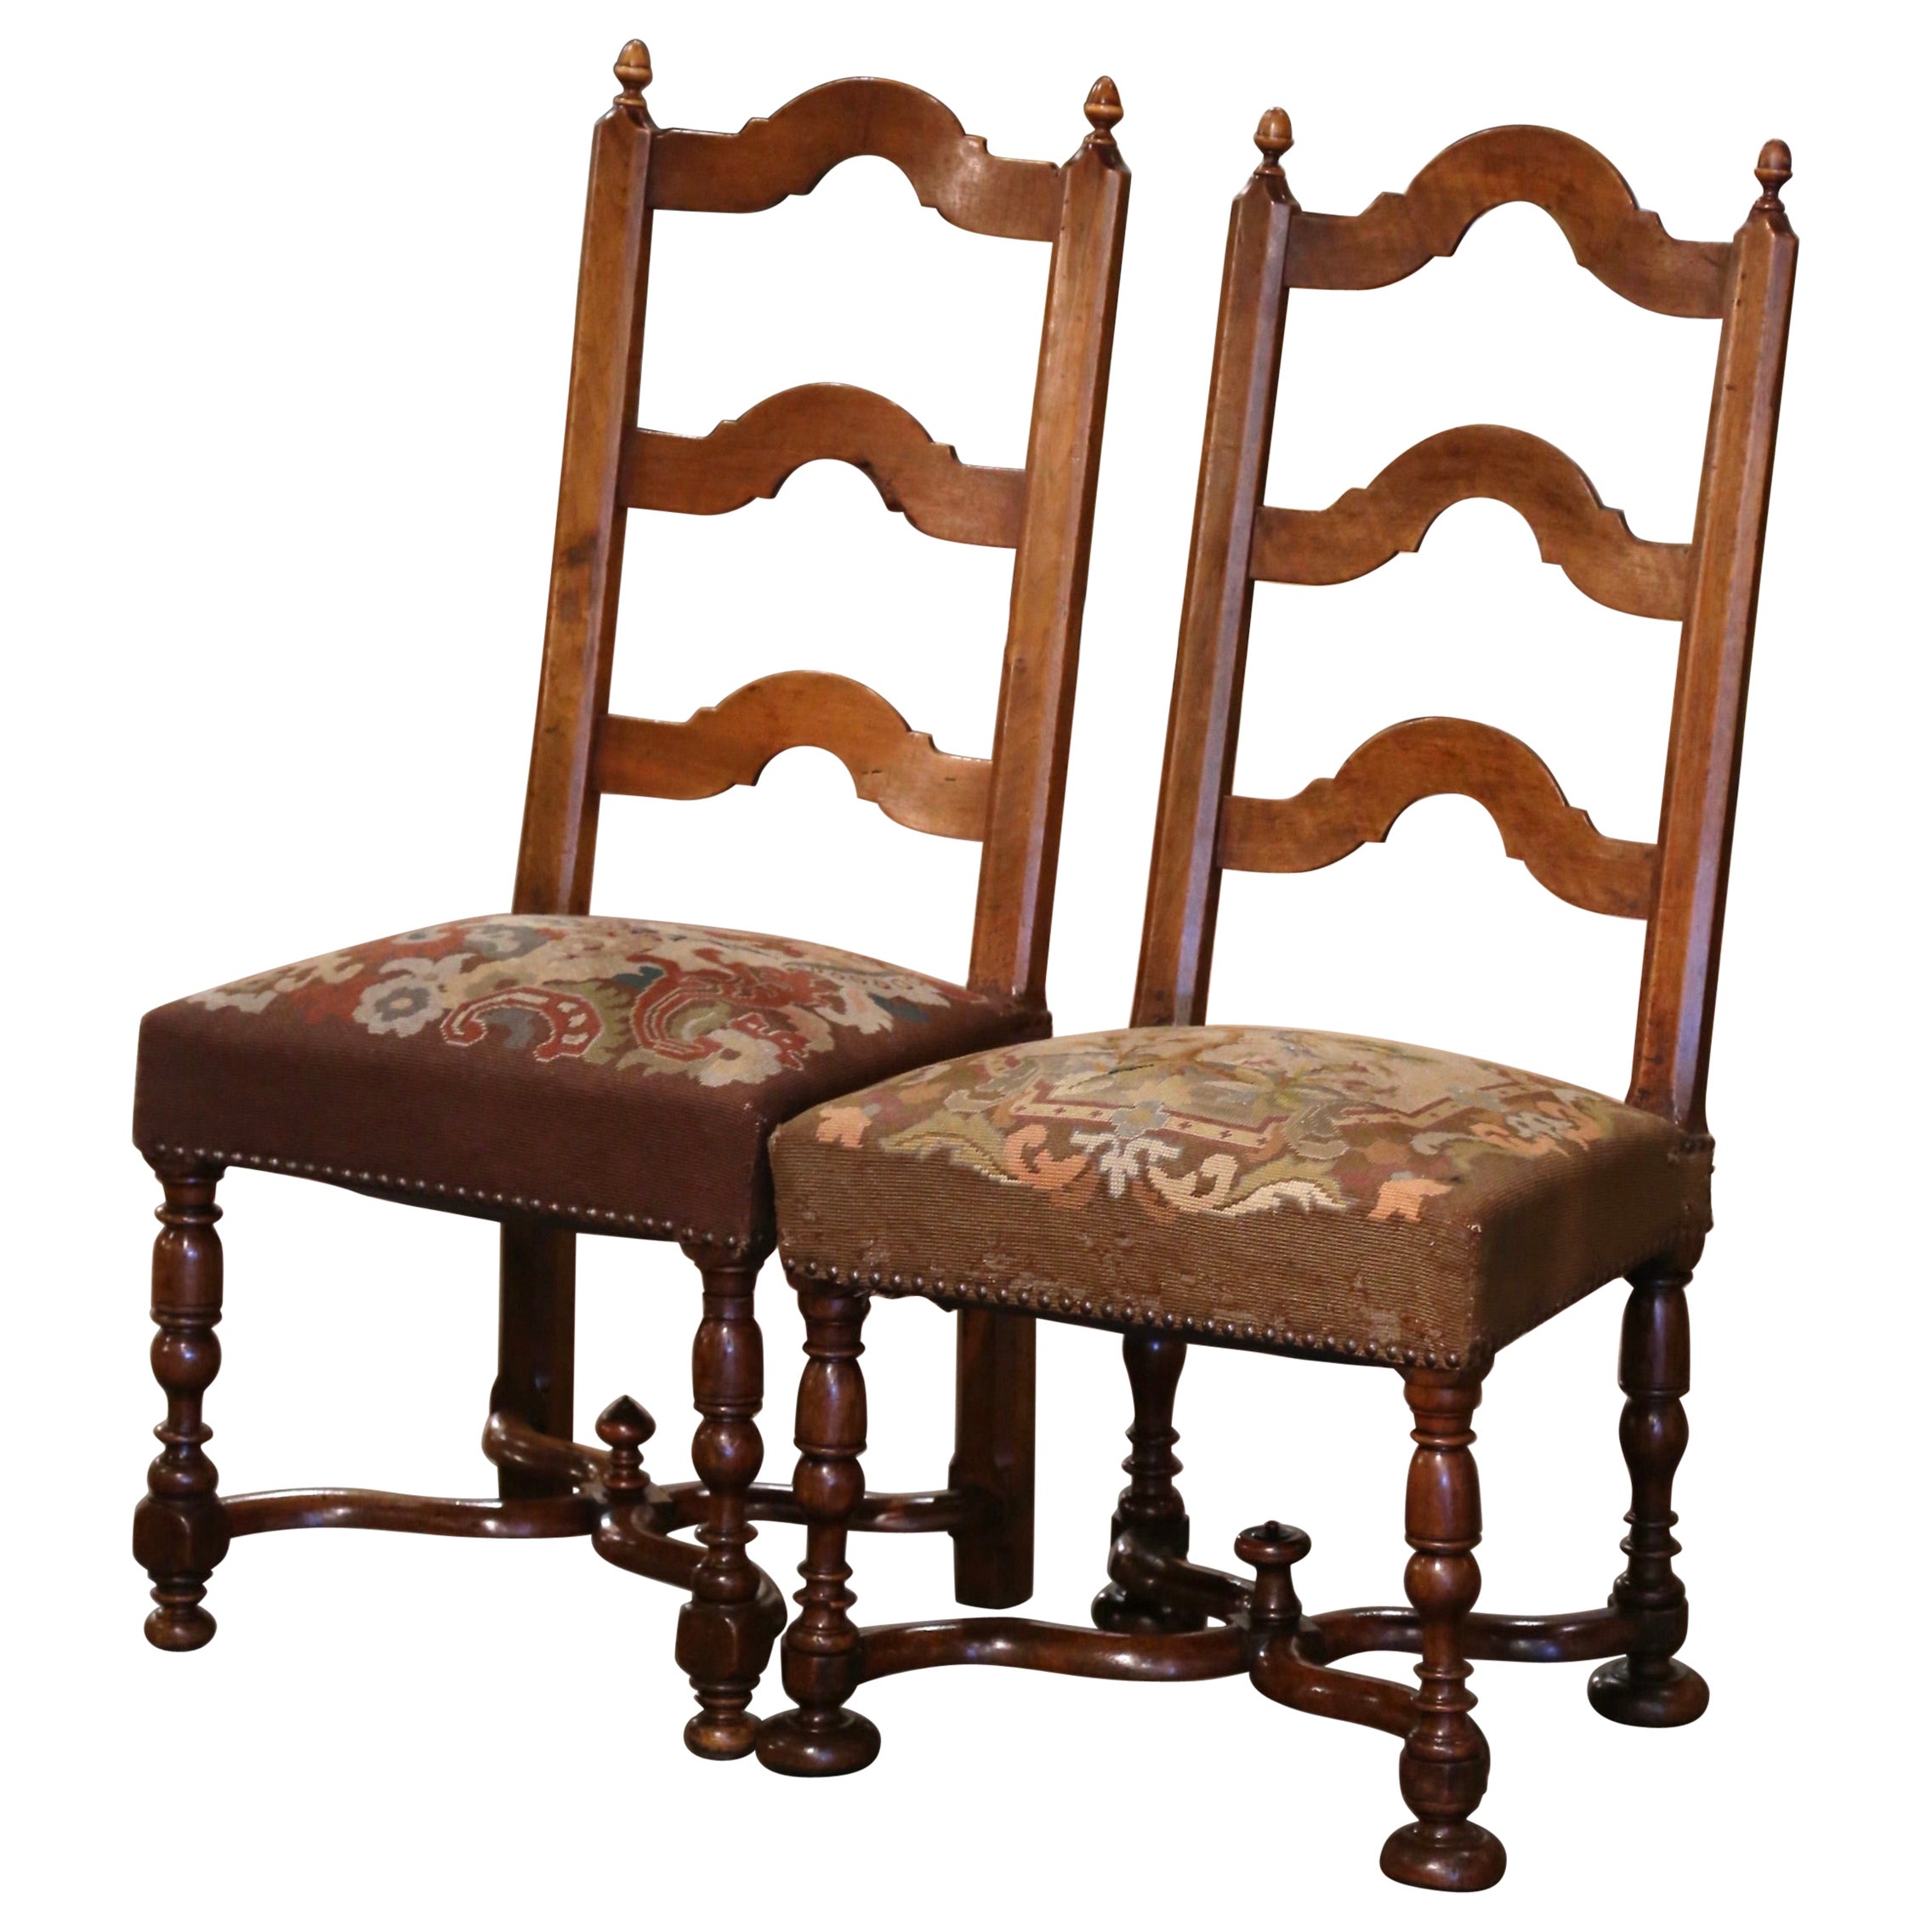 Pair of 19th Century French Carved Walnut Chairs with Needlepoint Upholstery For Sale